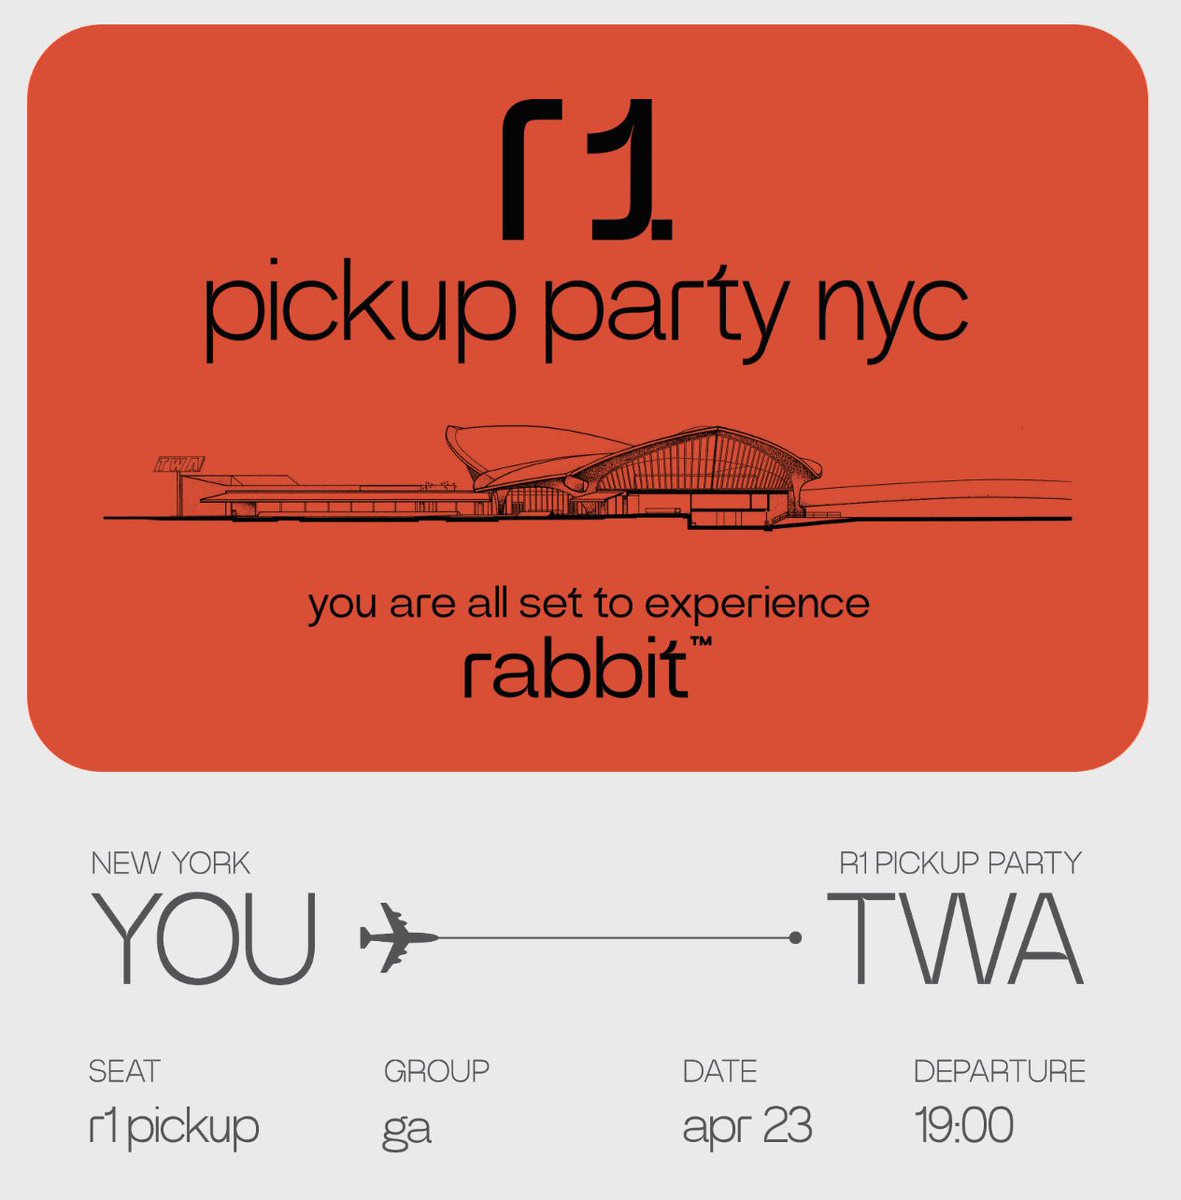 As a massive music production and AI nerd, I’m so stoked to be one of the first 300 people to get their rabbit r1 (designed by @jugendingenieur) at the @rabbit_hmi NYC event this week!

Apps are antiquated. LAM is the future.

Excited to meet everyone there 🎉

#rabbitr1 #TWA